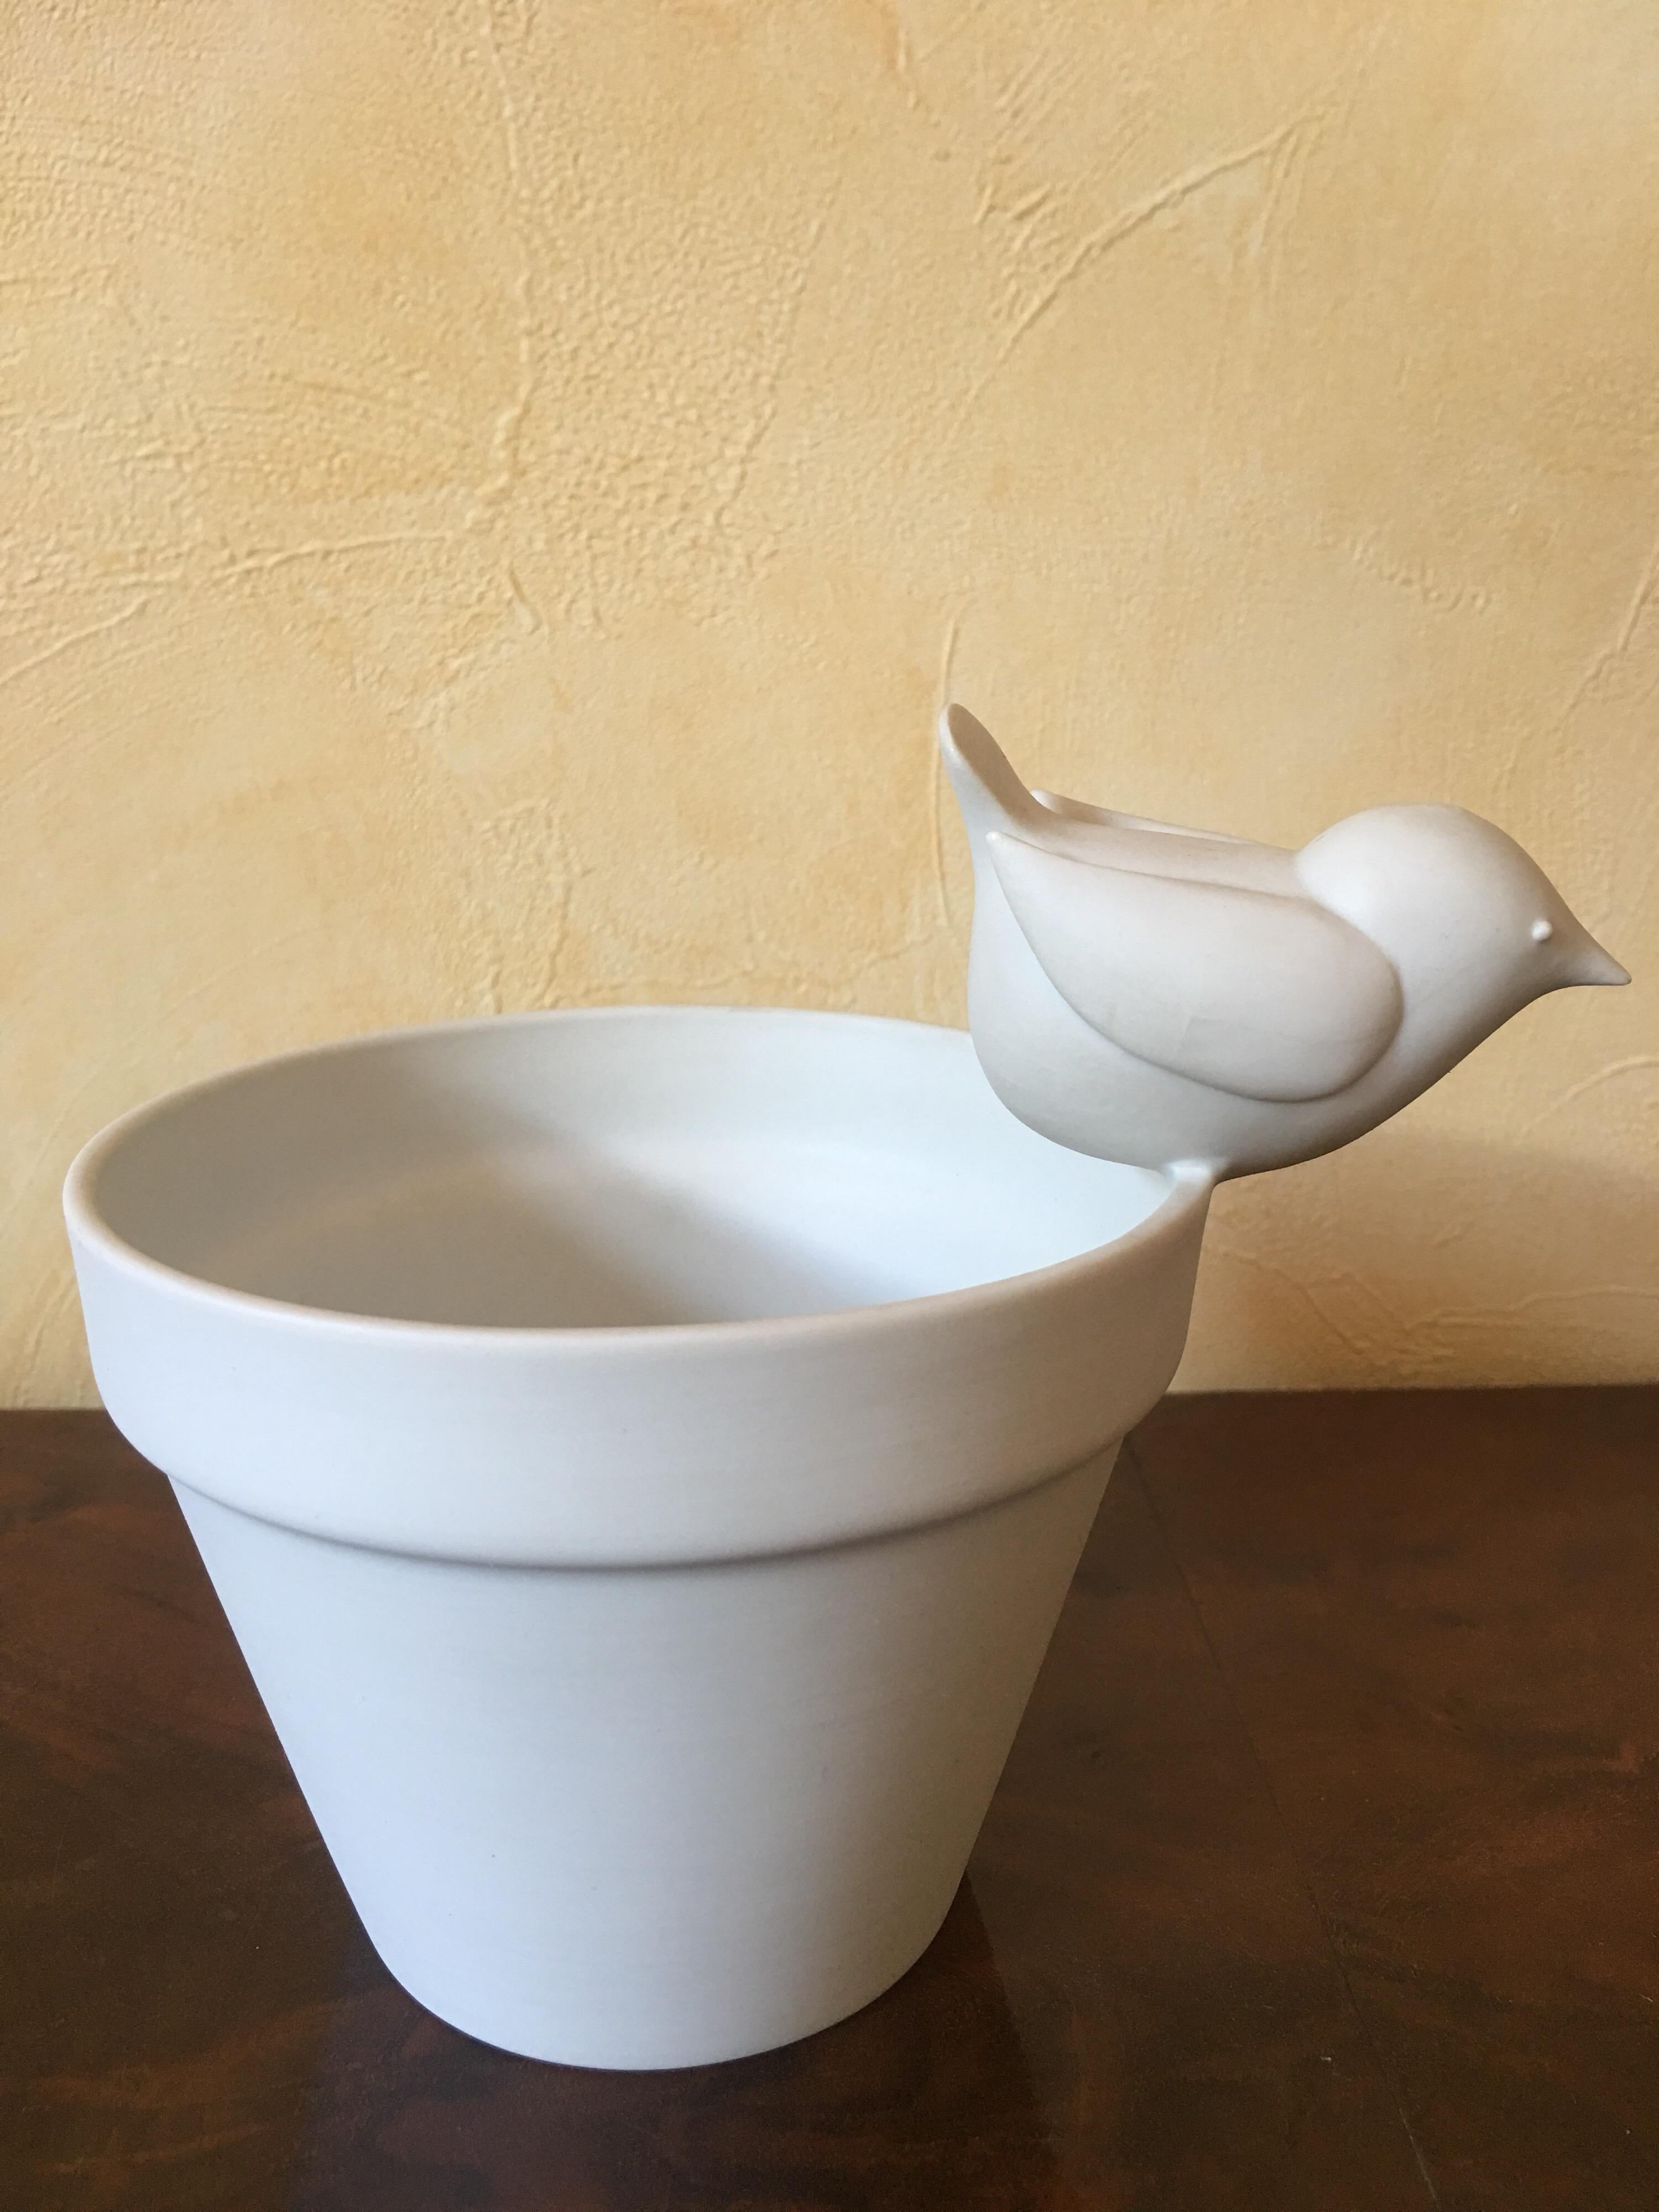 Rare white porcelain pot designed By Francois Xavier Lalanne in Paris in 1998.
Underside signed and Located 